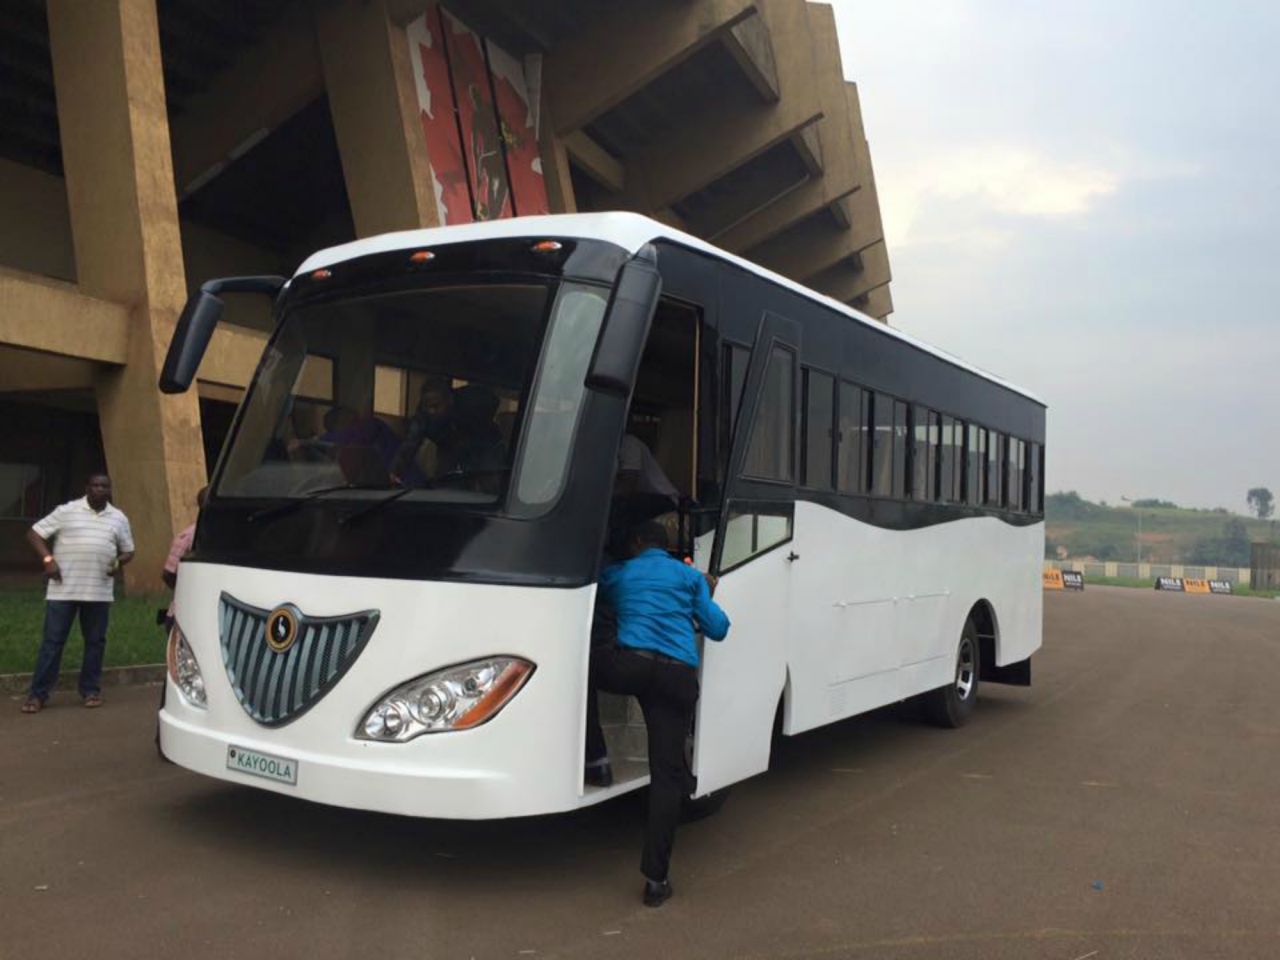 Ugandan company <a href="http://cnn.com/2016/02/15/africa/africa-solar-bus-kiira-uganda/index.html">Kiira Motors has launched Africa's first solar powered bus</a> -- and plans to expand the country's solar vehicle industry.